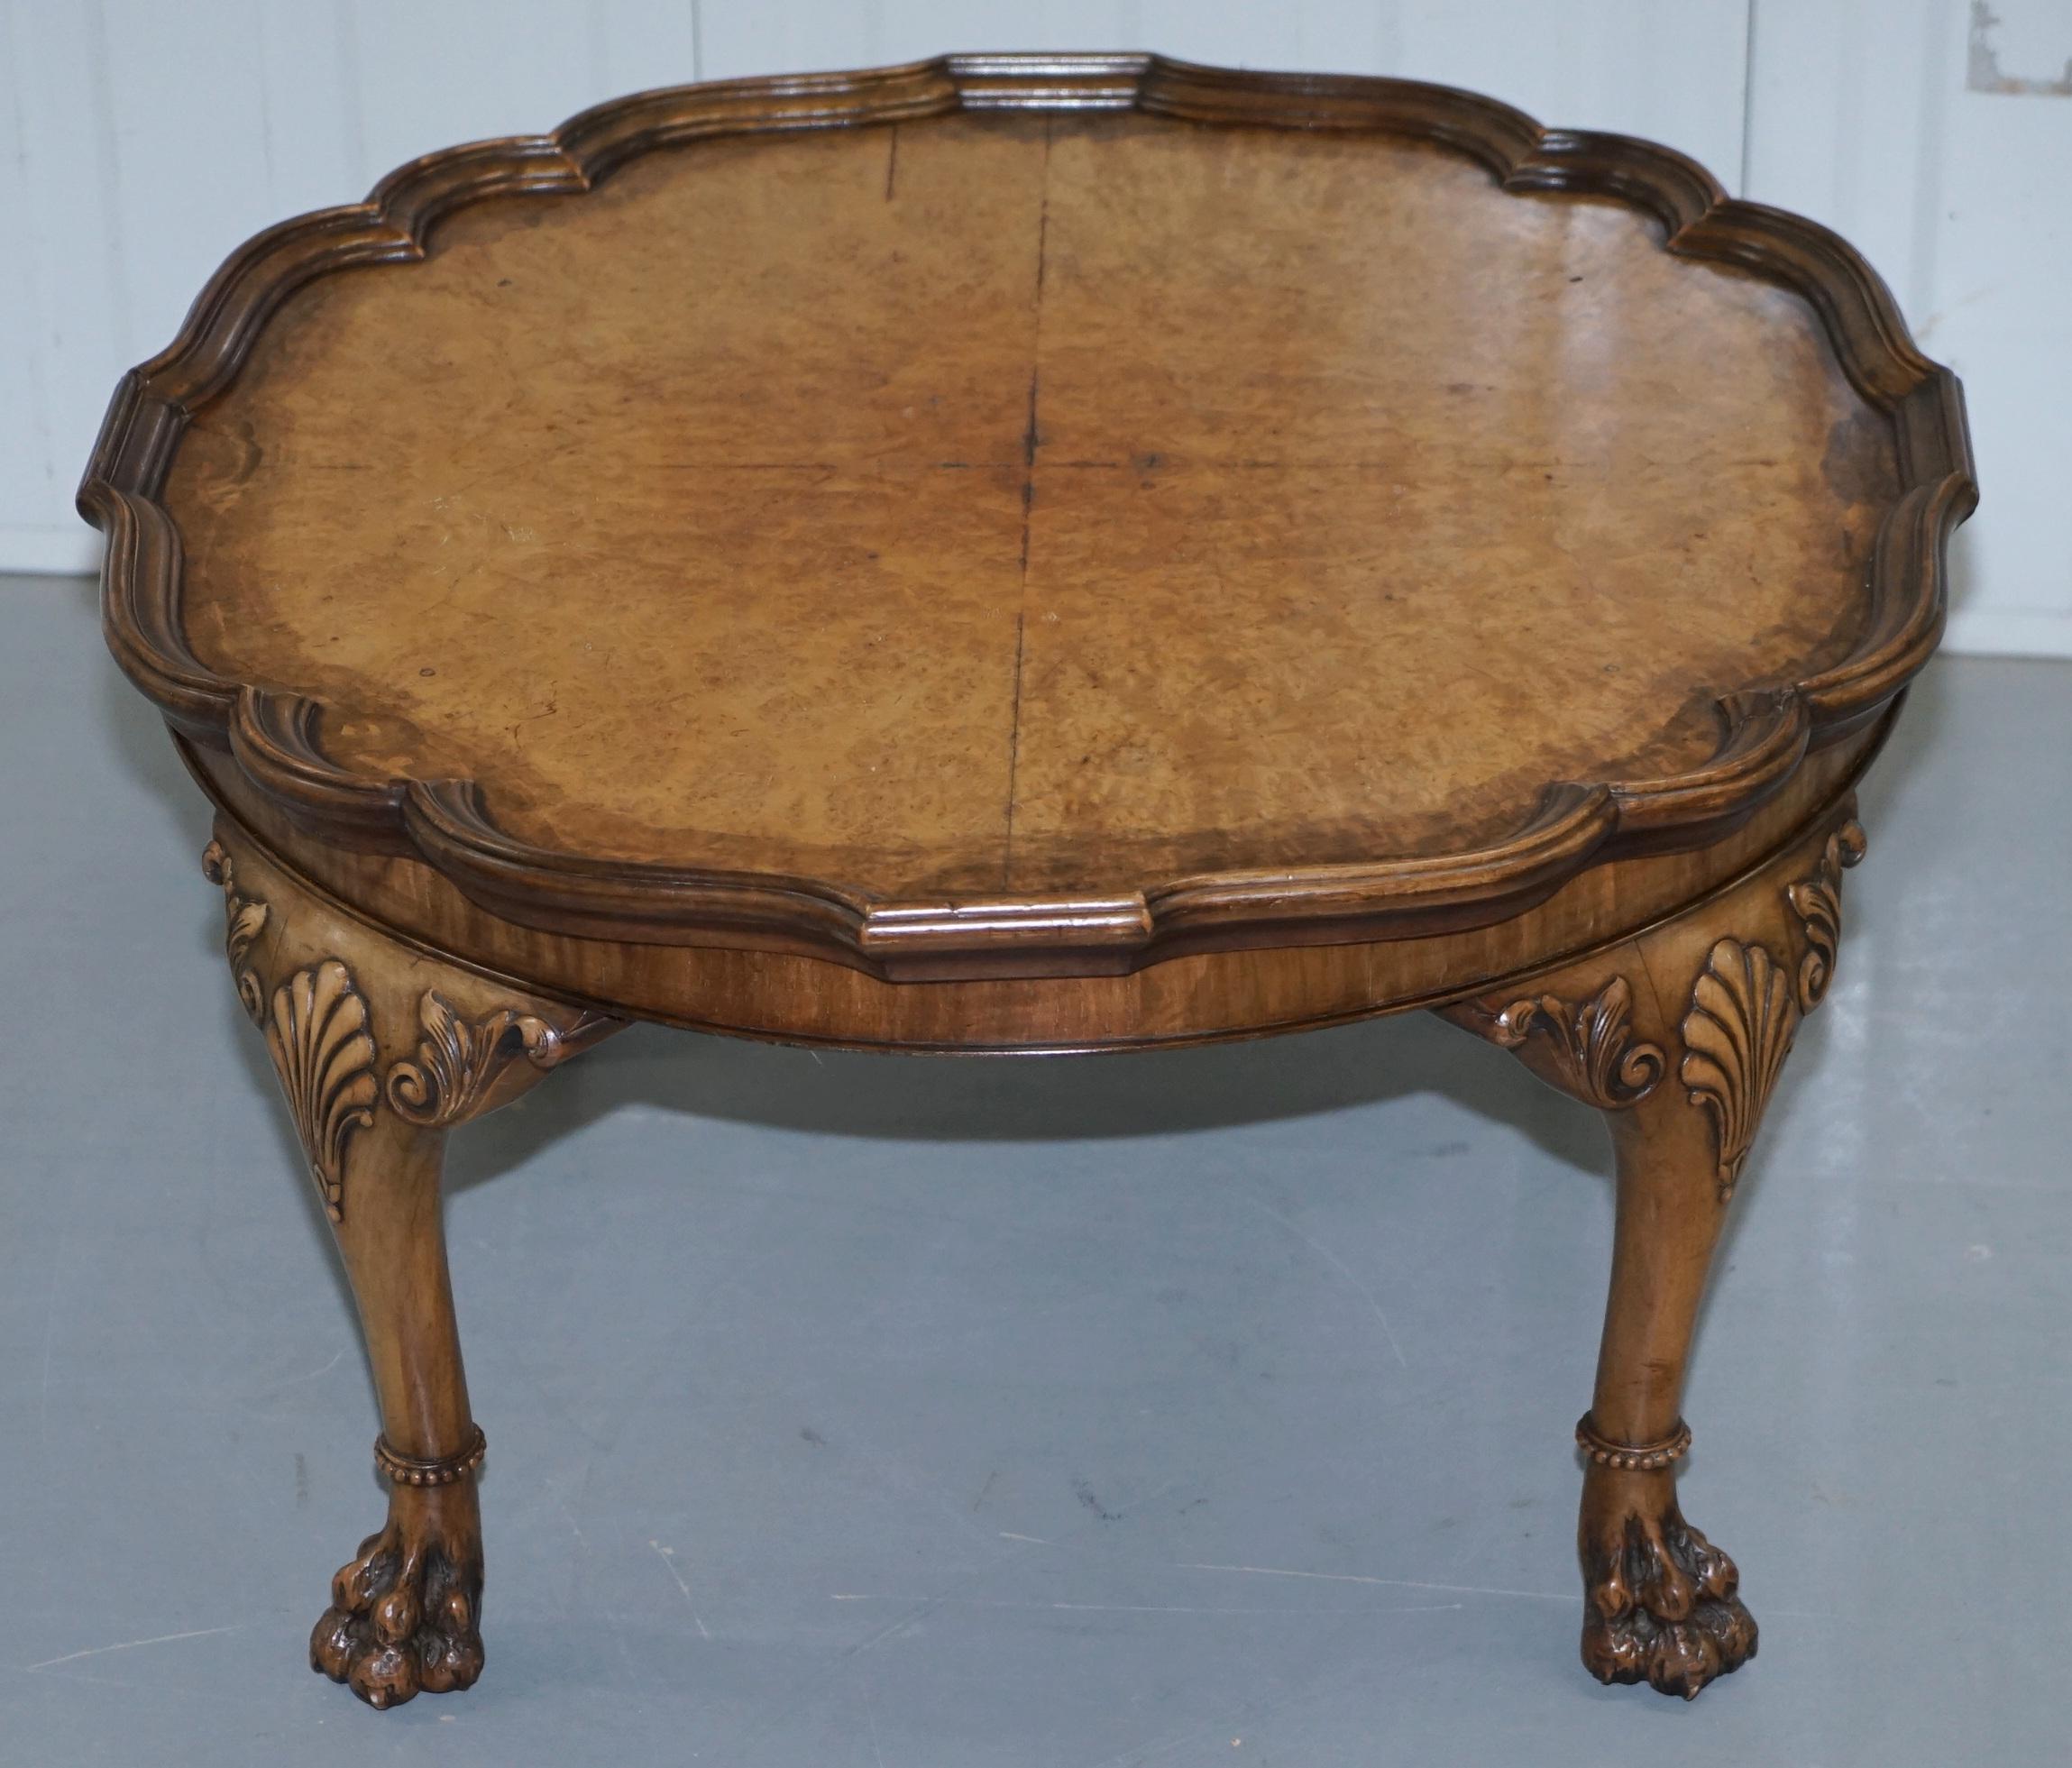 We are delighted to offer for sale this stunning Georgian Irish style circa 1920s Burr walnut coffee table with lovely carved cabriolet legs finished with lion hairy paw feet

A very good looking and well-made table, in the Georgian Irish manor,